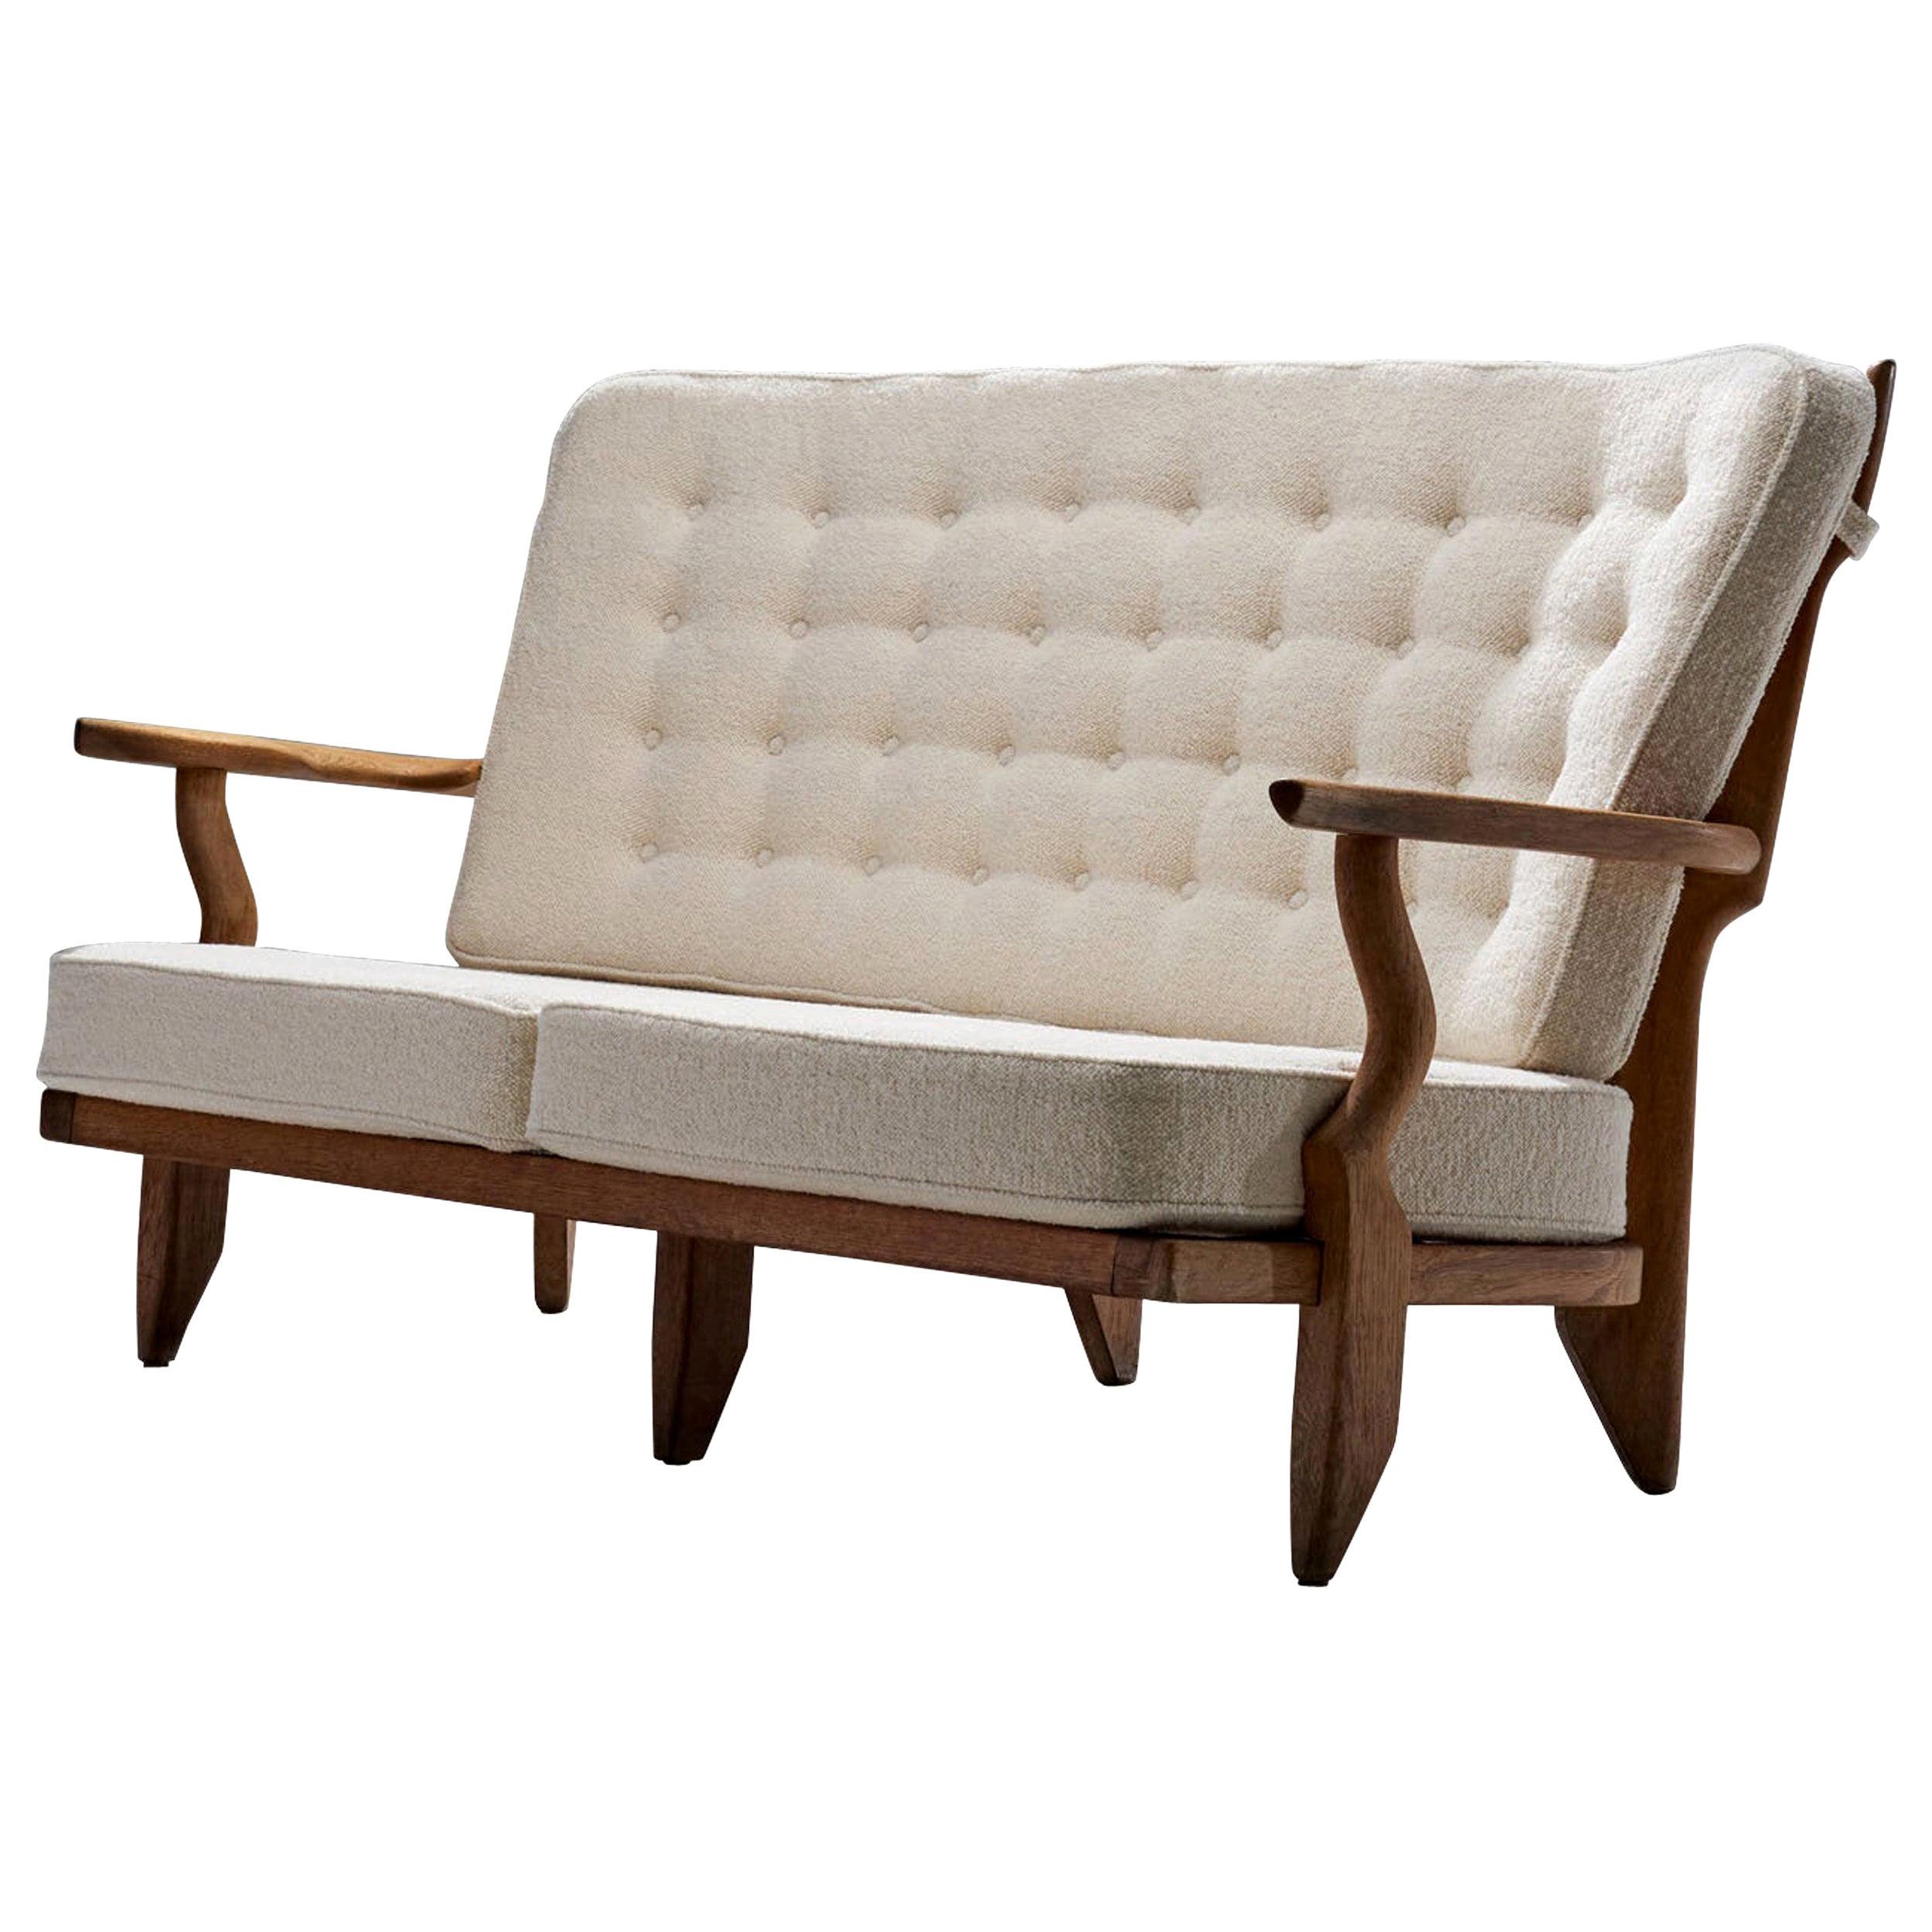 Guillerme et Chambron "Grand Repos" Sofa, France 1950s For Sale